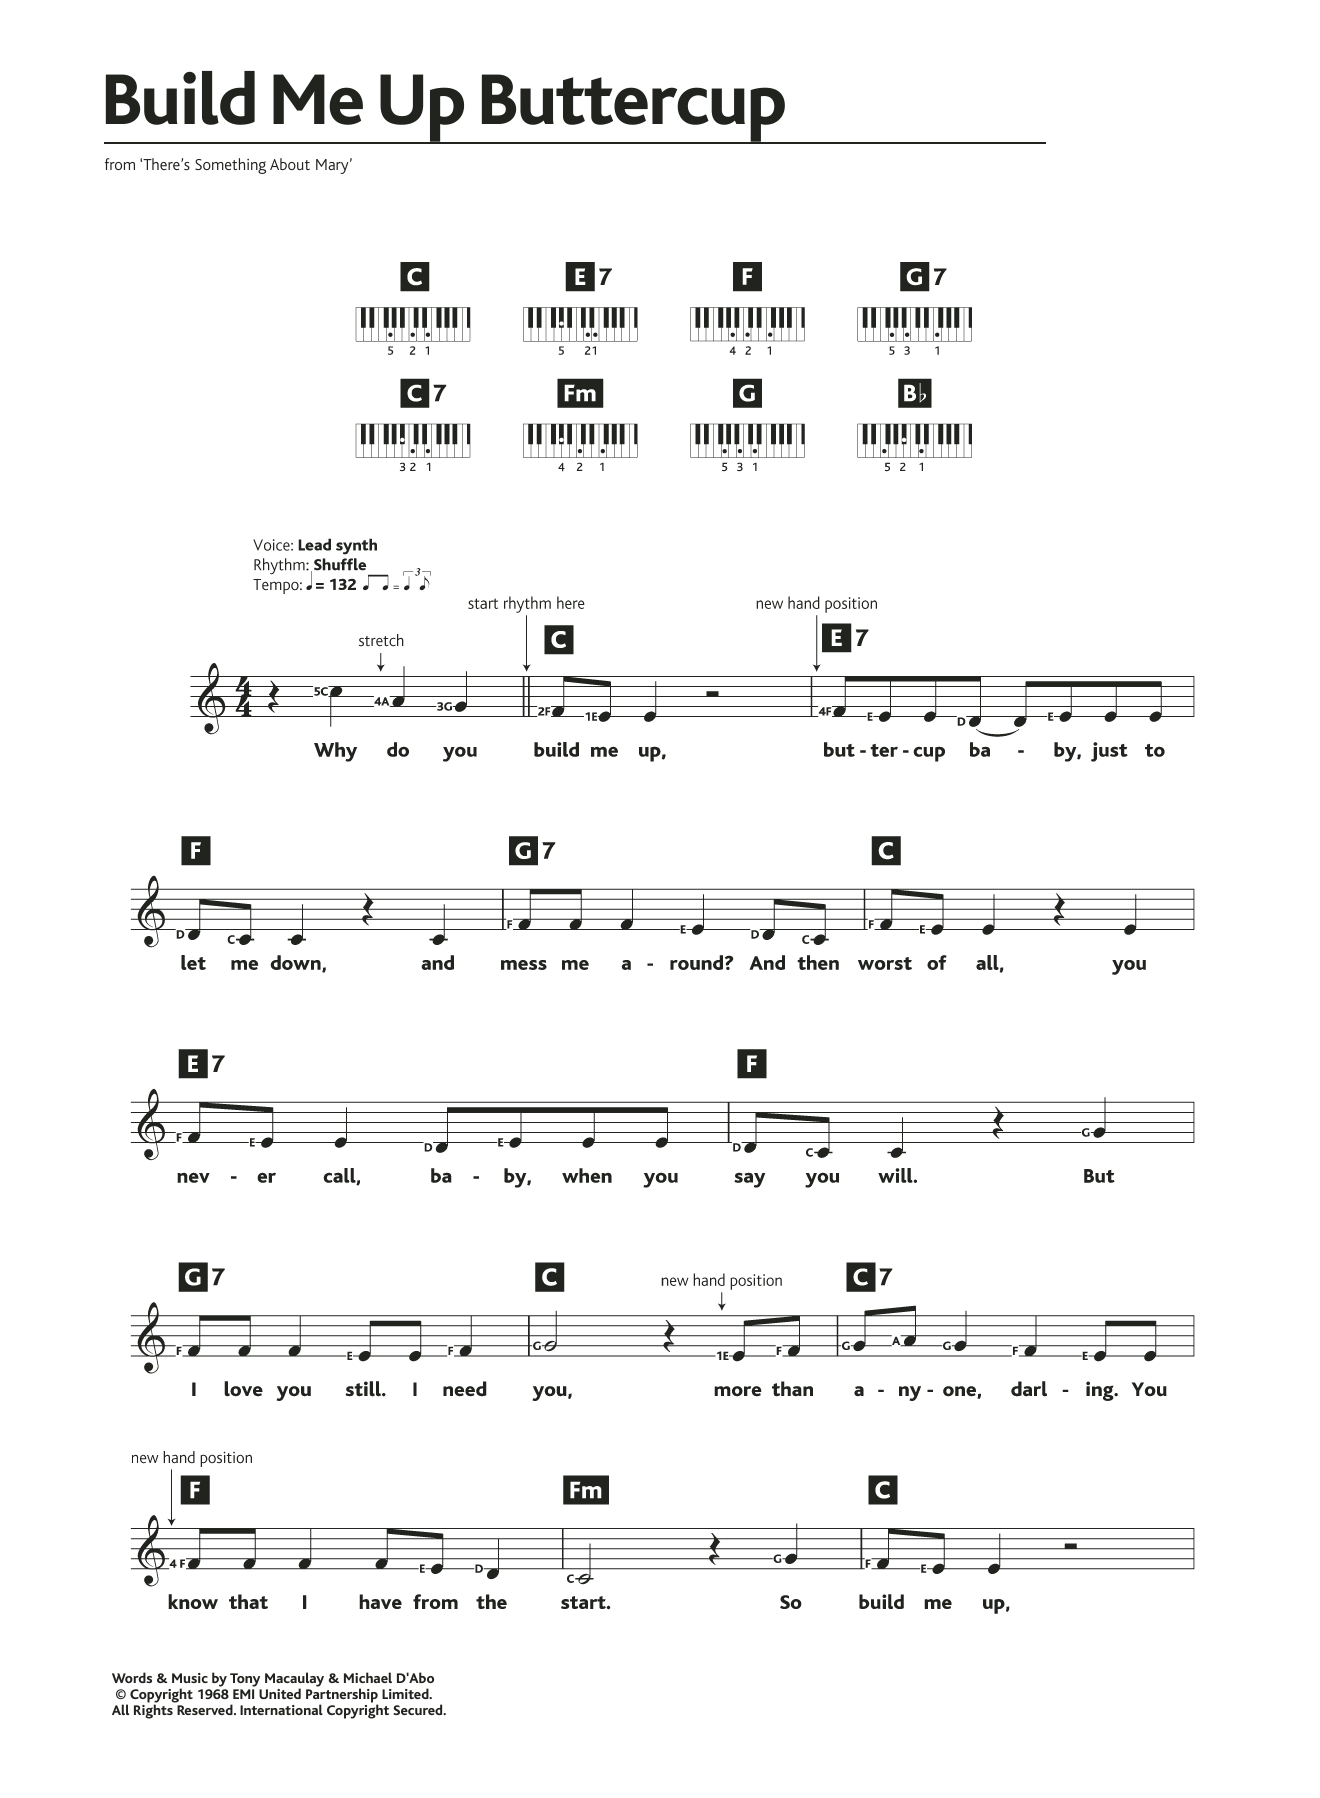 Download The Foundations Build Me Up Buttercup Sheet Music